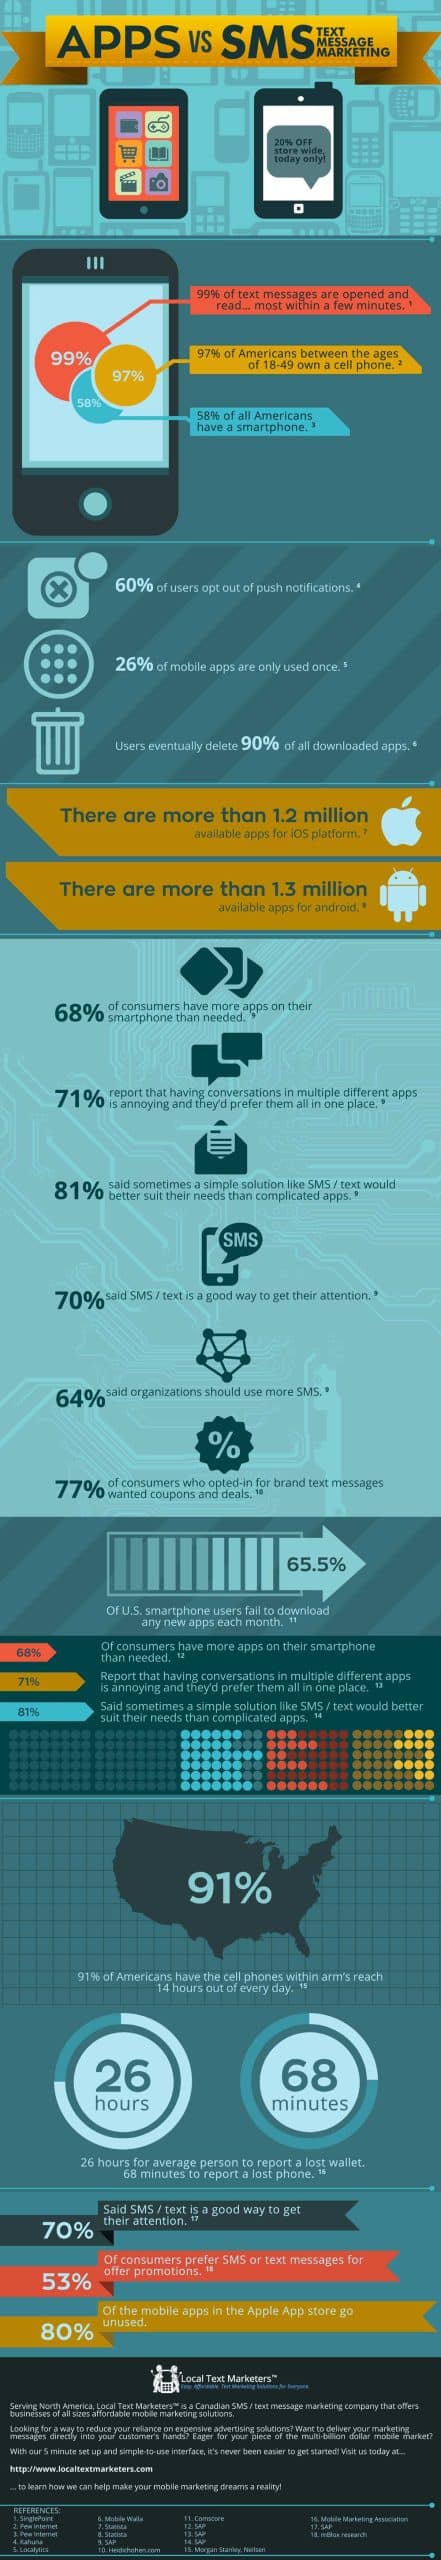 Apps vs. SMS Infographic